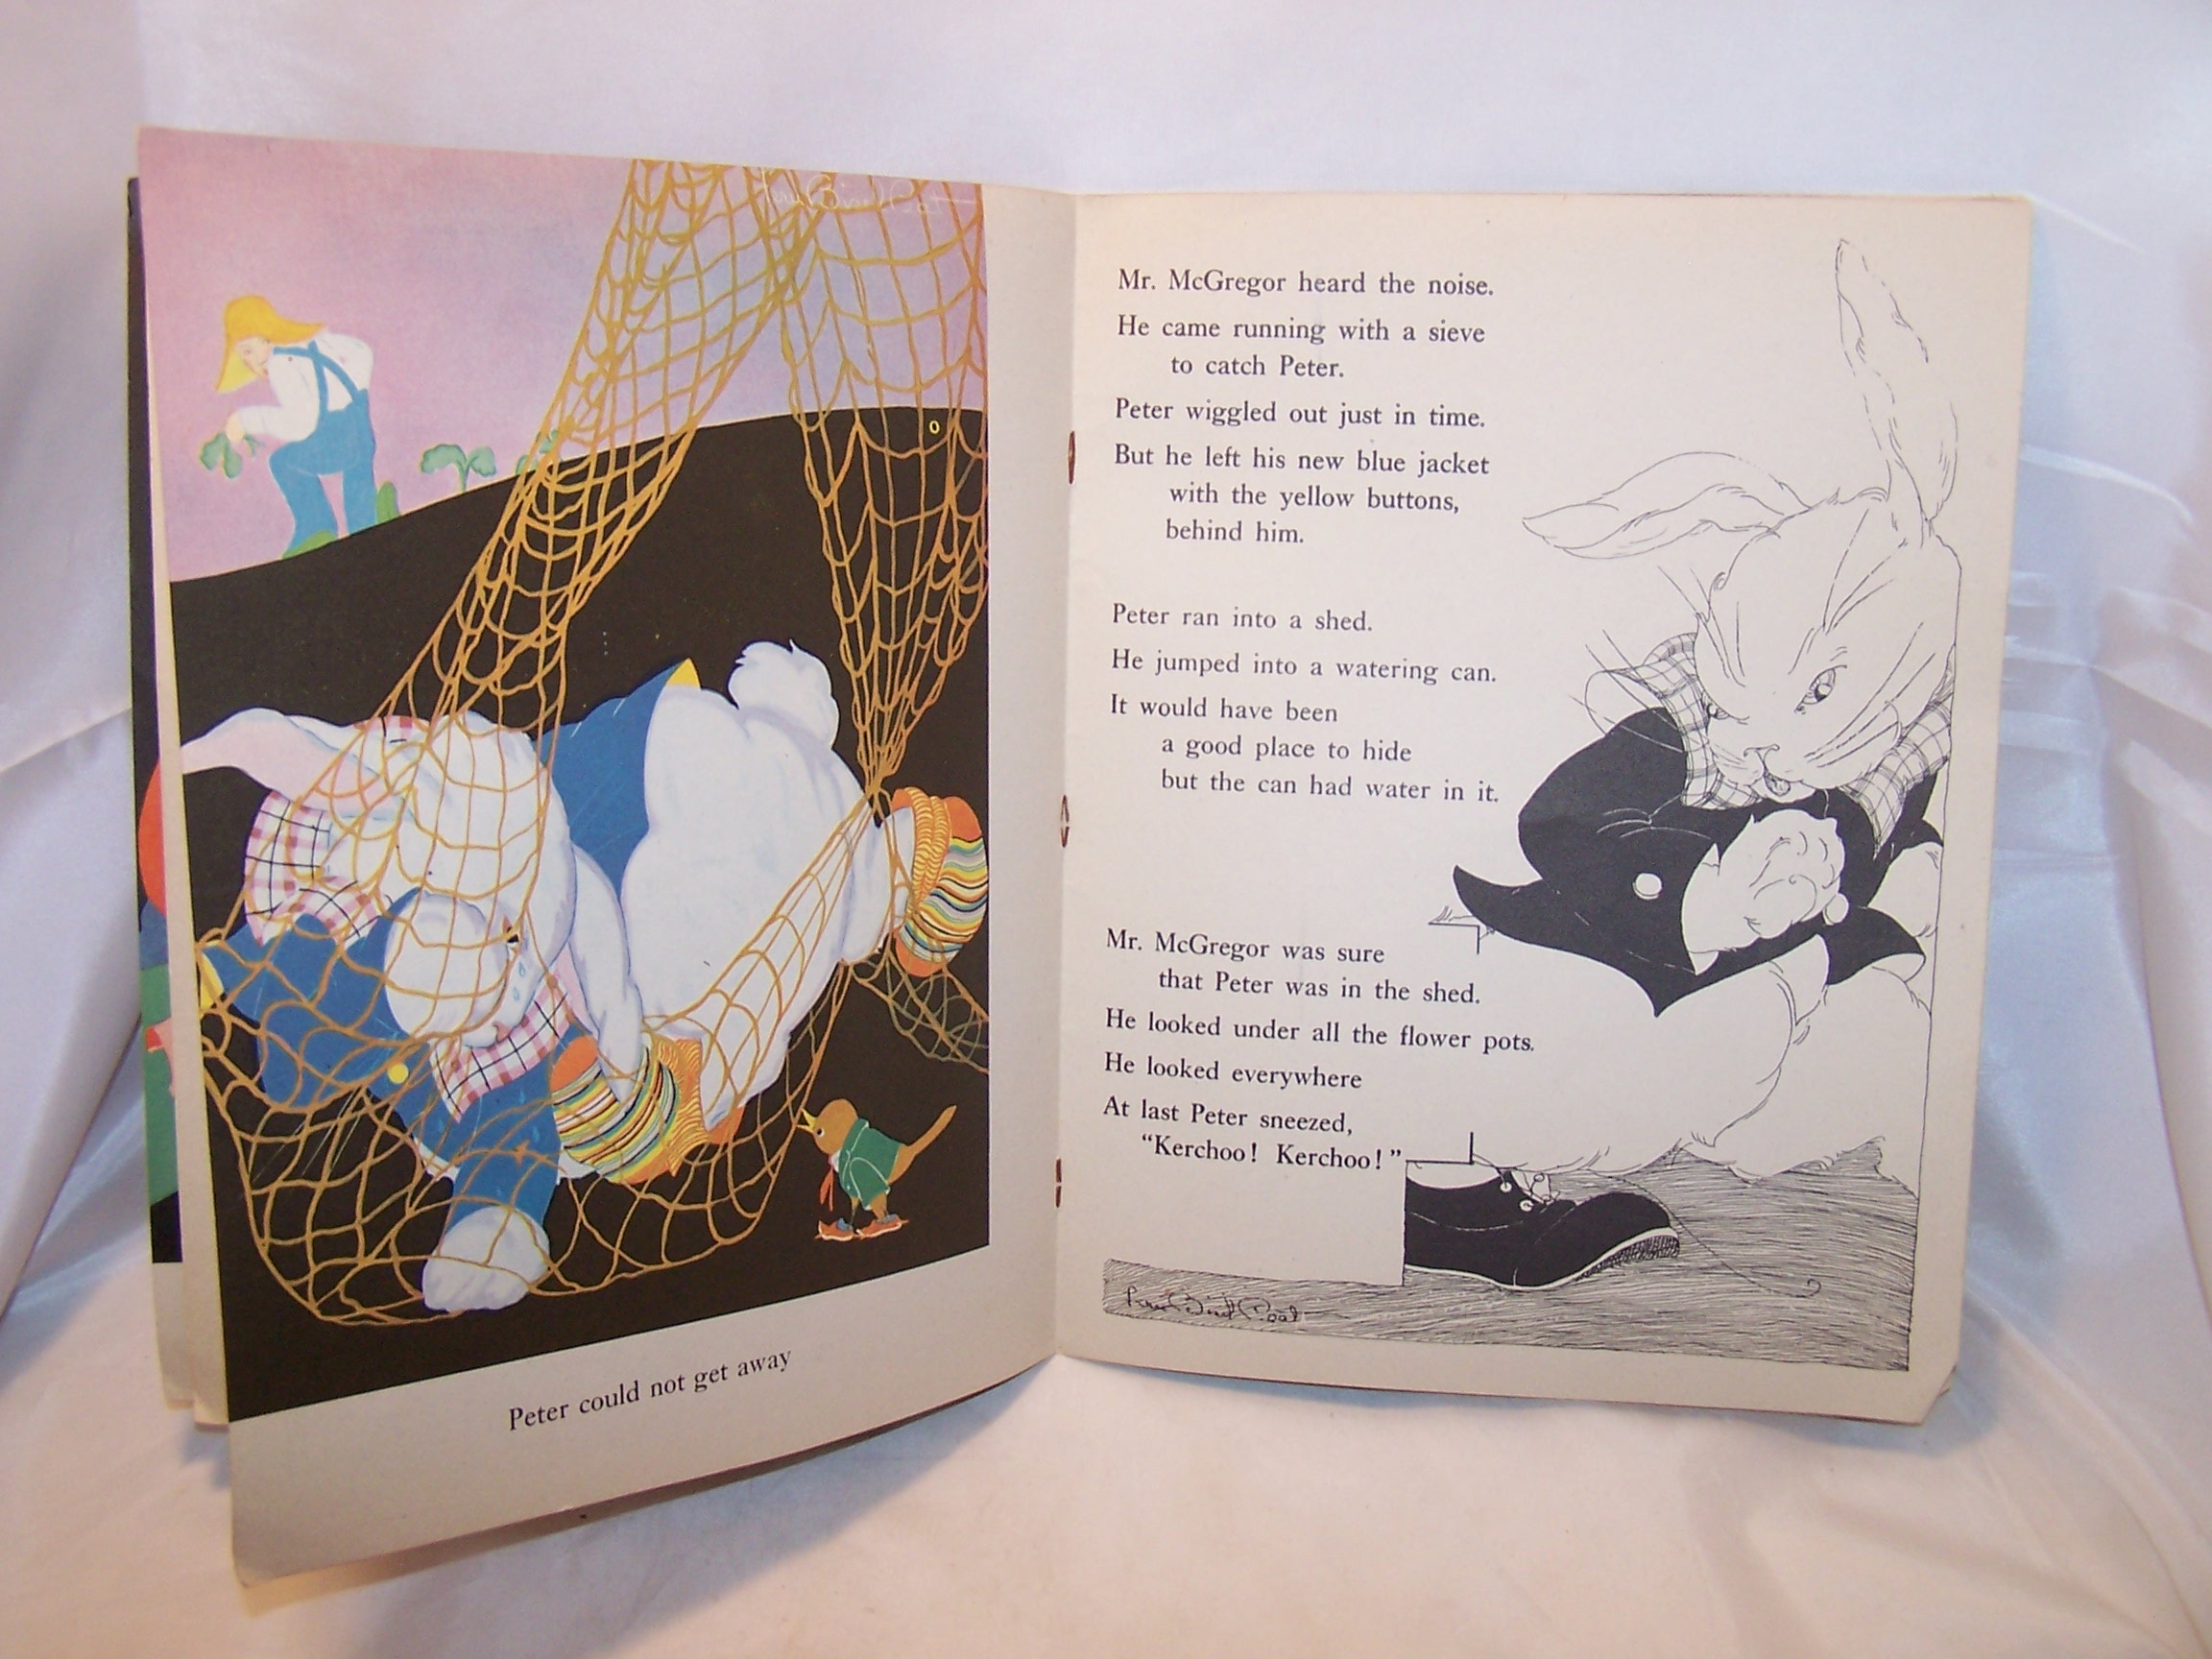 Image 6 of Peter Rabbit Book, Storybook, 1946, Aldredge and McKee, Prang Company Publishers